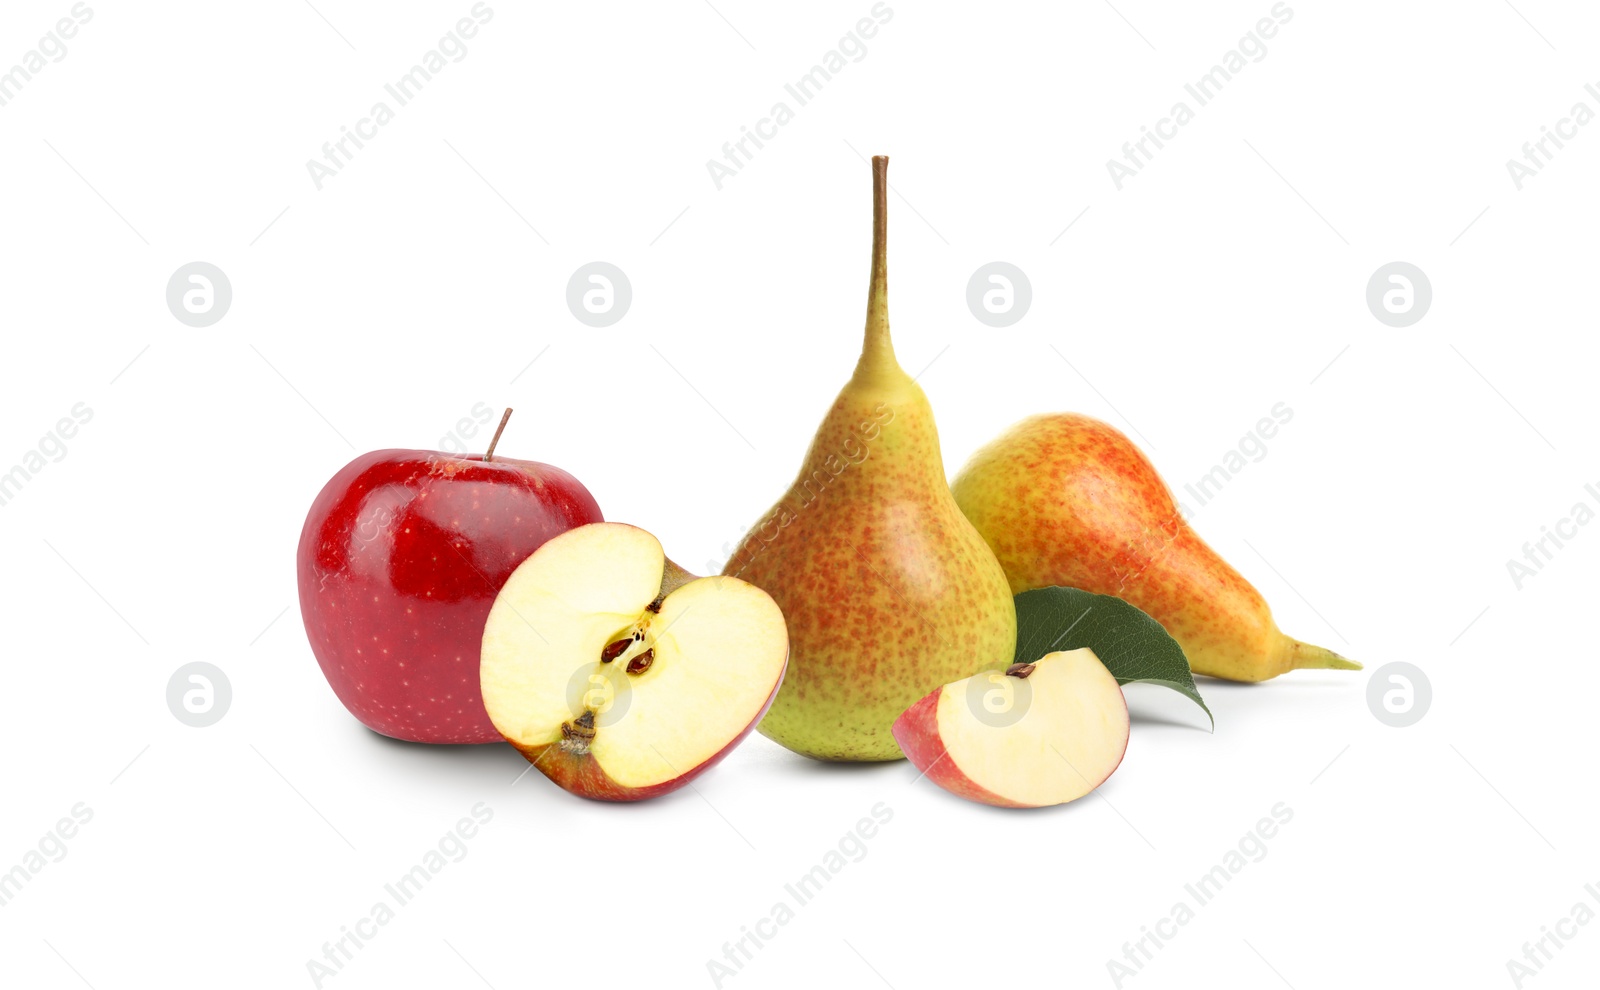 Image of Ripe juicy pears and apples on white background